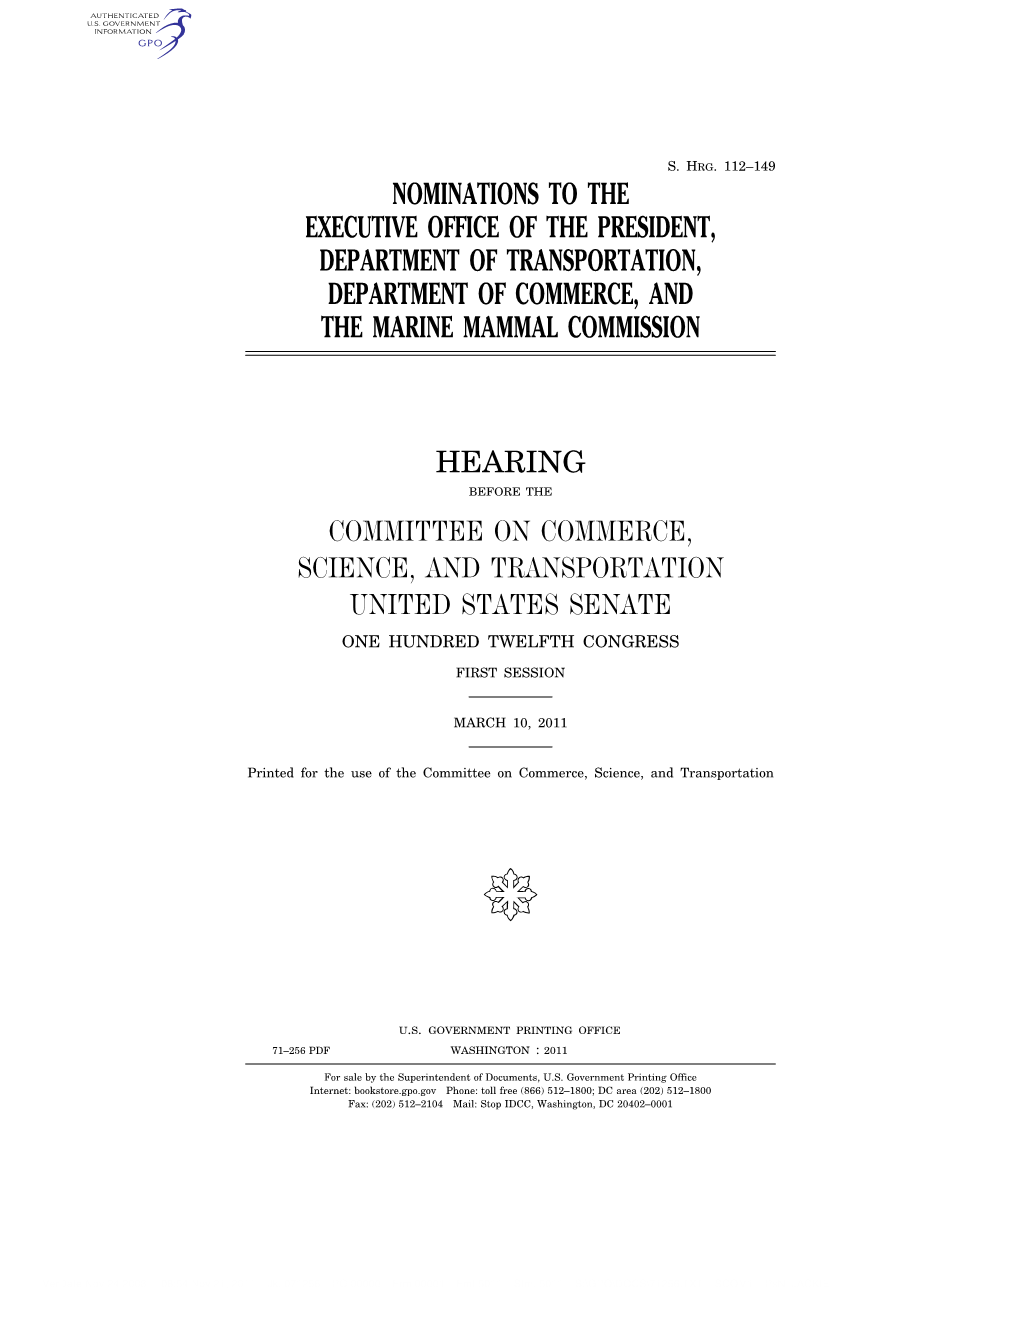 Nominations to the Executive Office of the President, Department of Transportation, Department of Commerce, and the Marine Mammal Commission